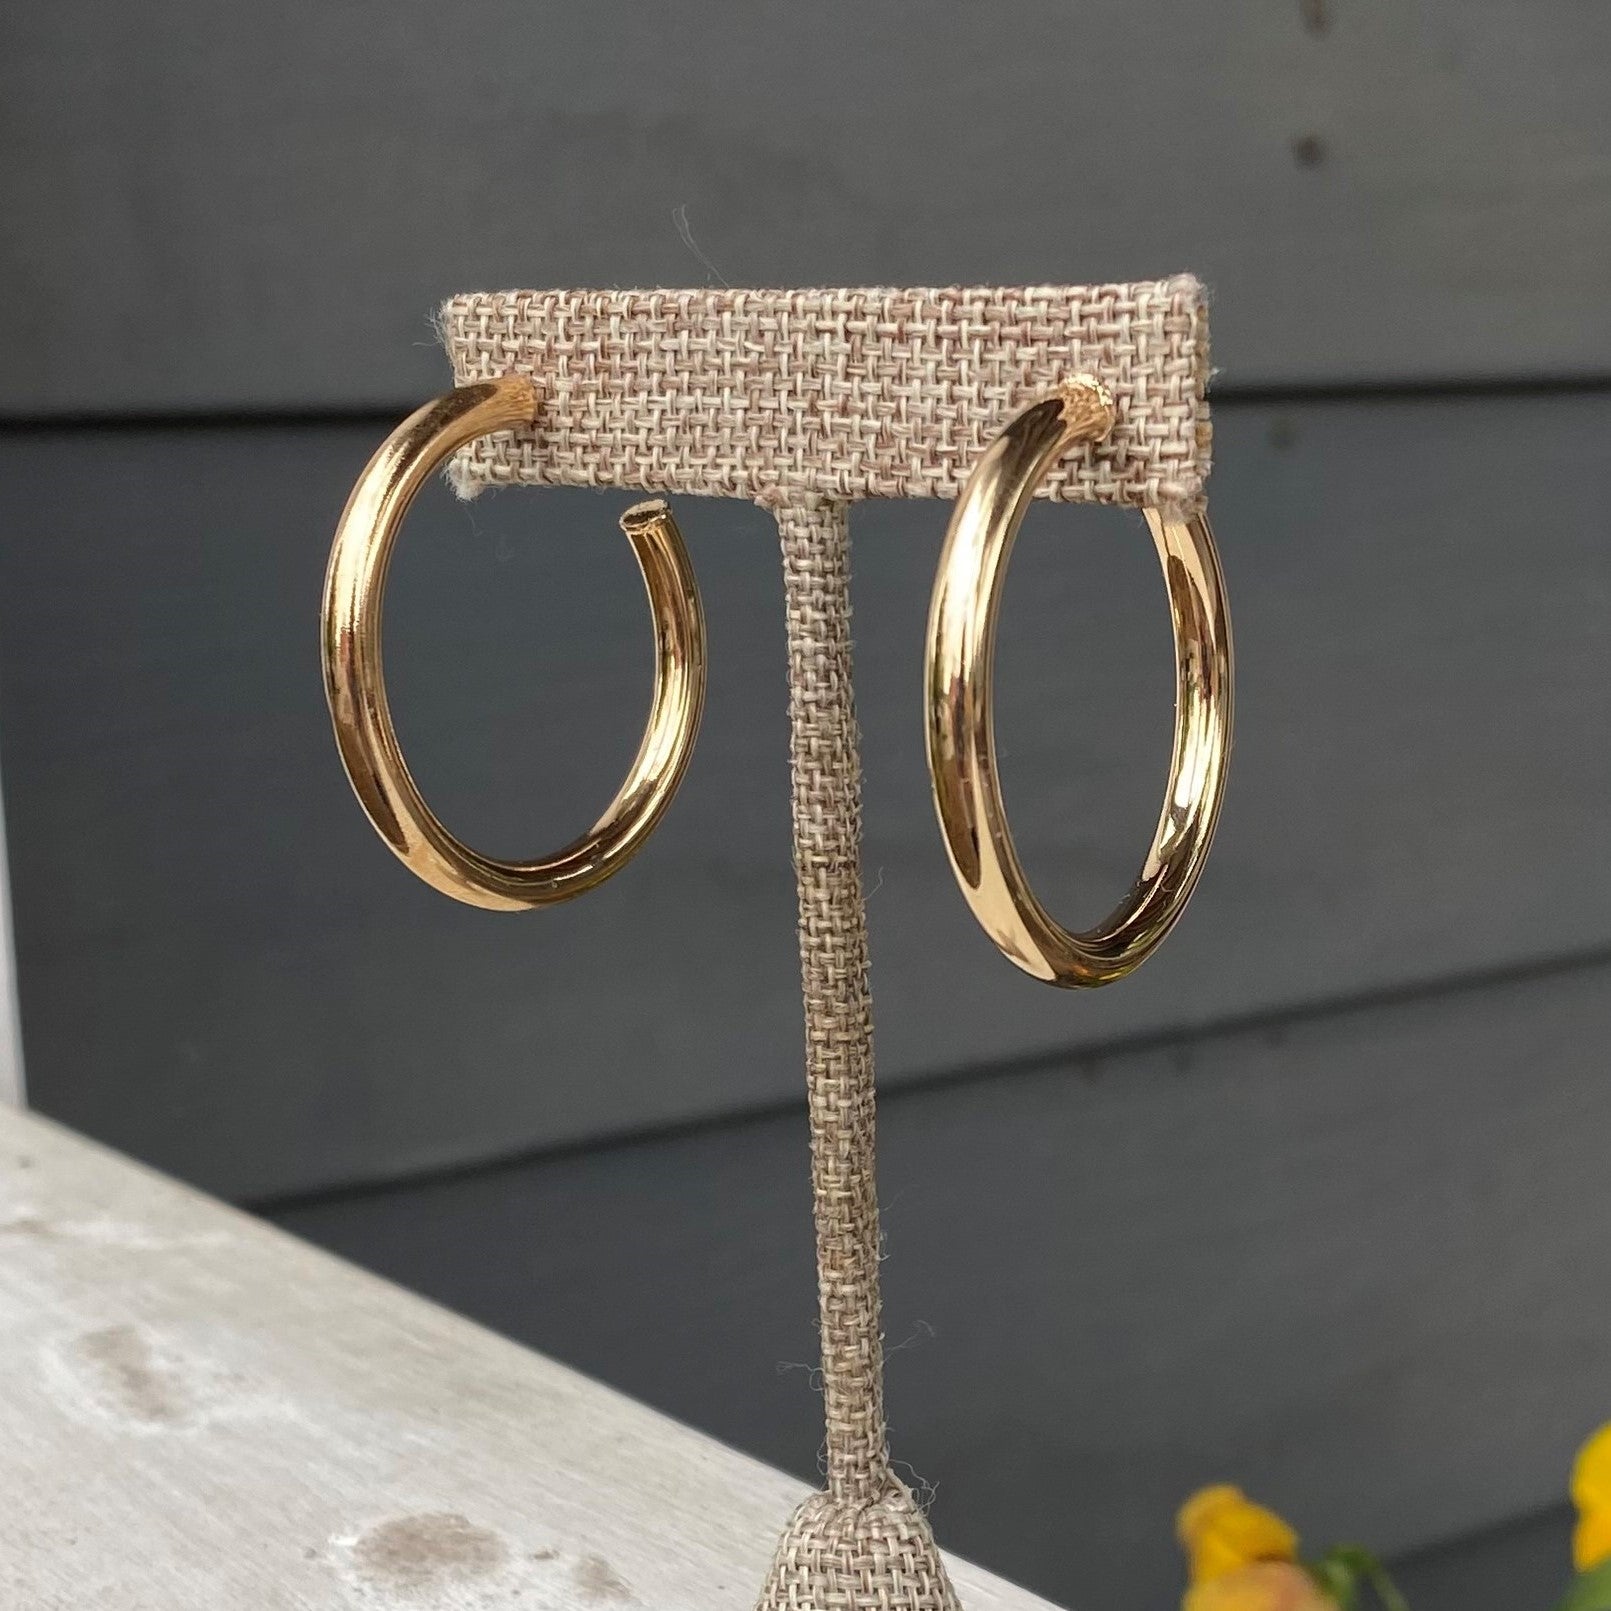 These stunning 1.5" Shinny Gold Hoop Earrings add a classic and sophisticated touch to every outfit. Gold with a shinny finish, these earrings are perfect for everyday wear.